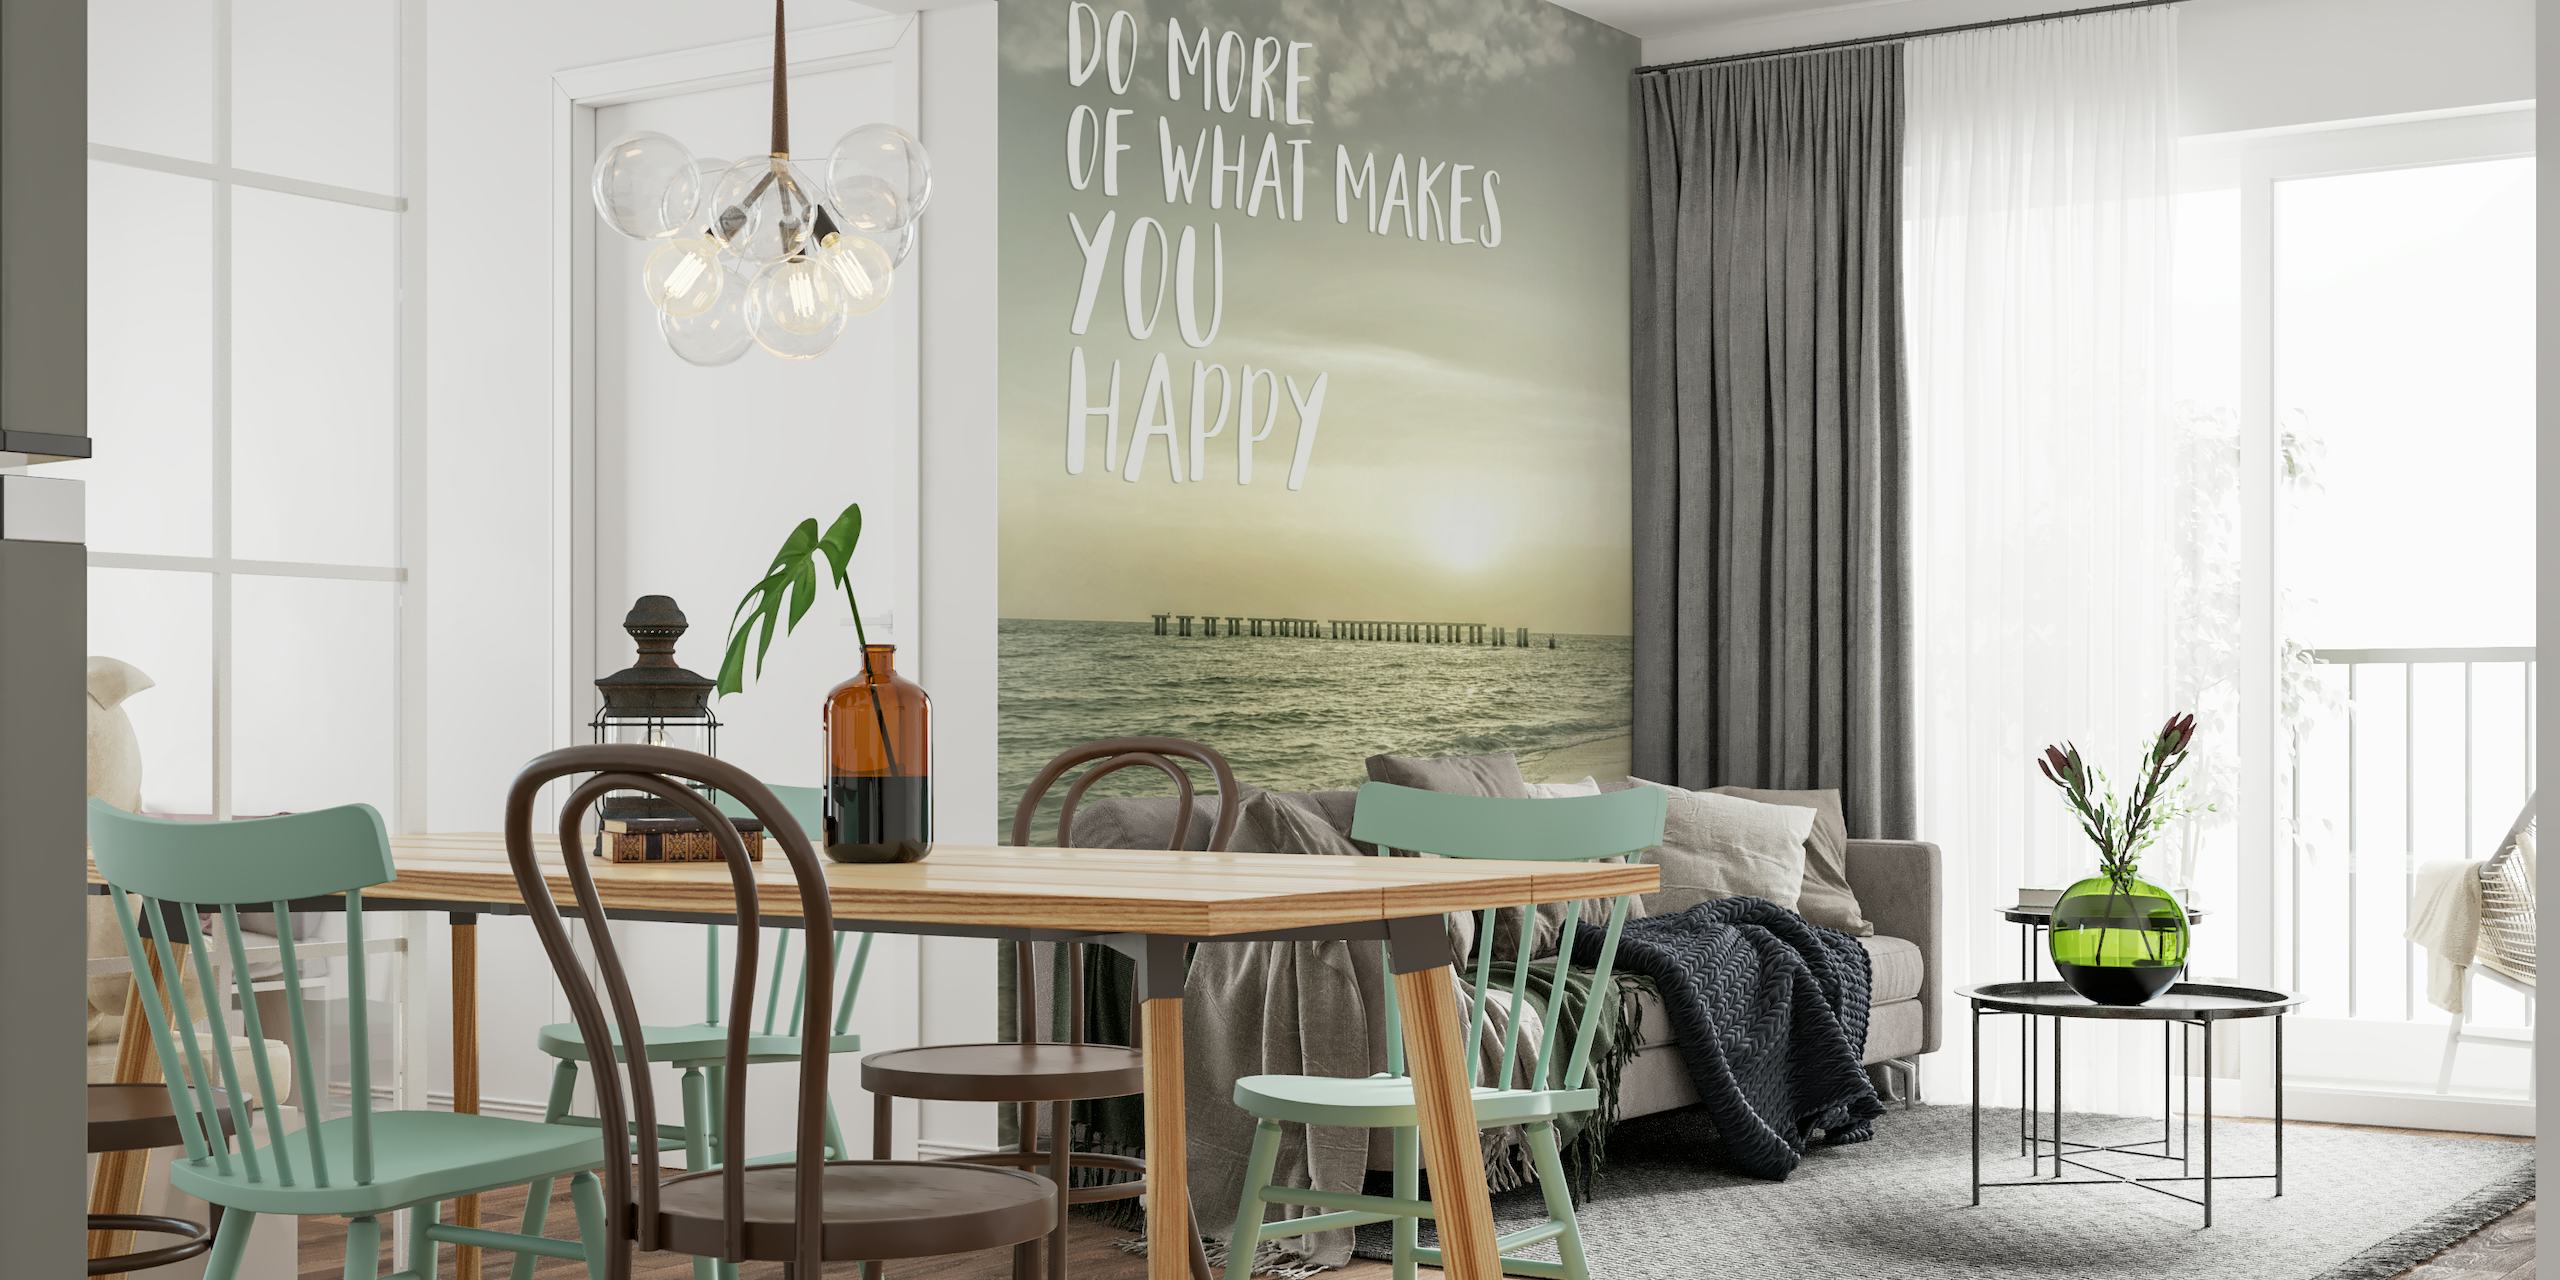 Do more of what makes you happy | Sunset behang